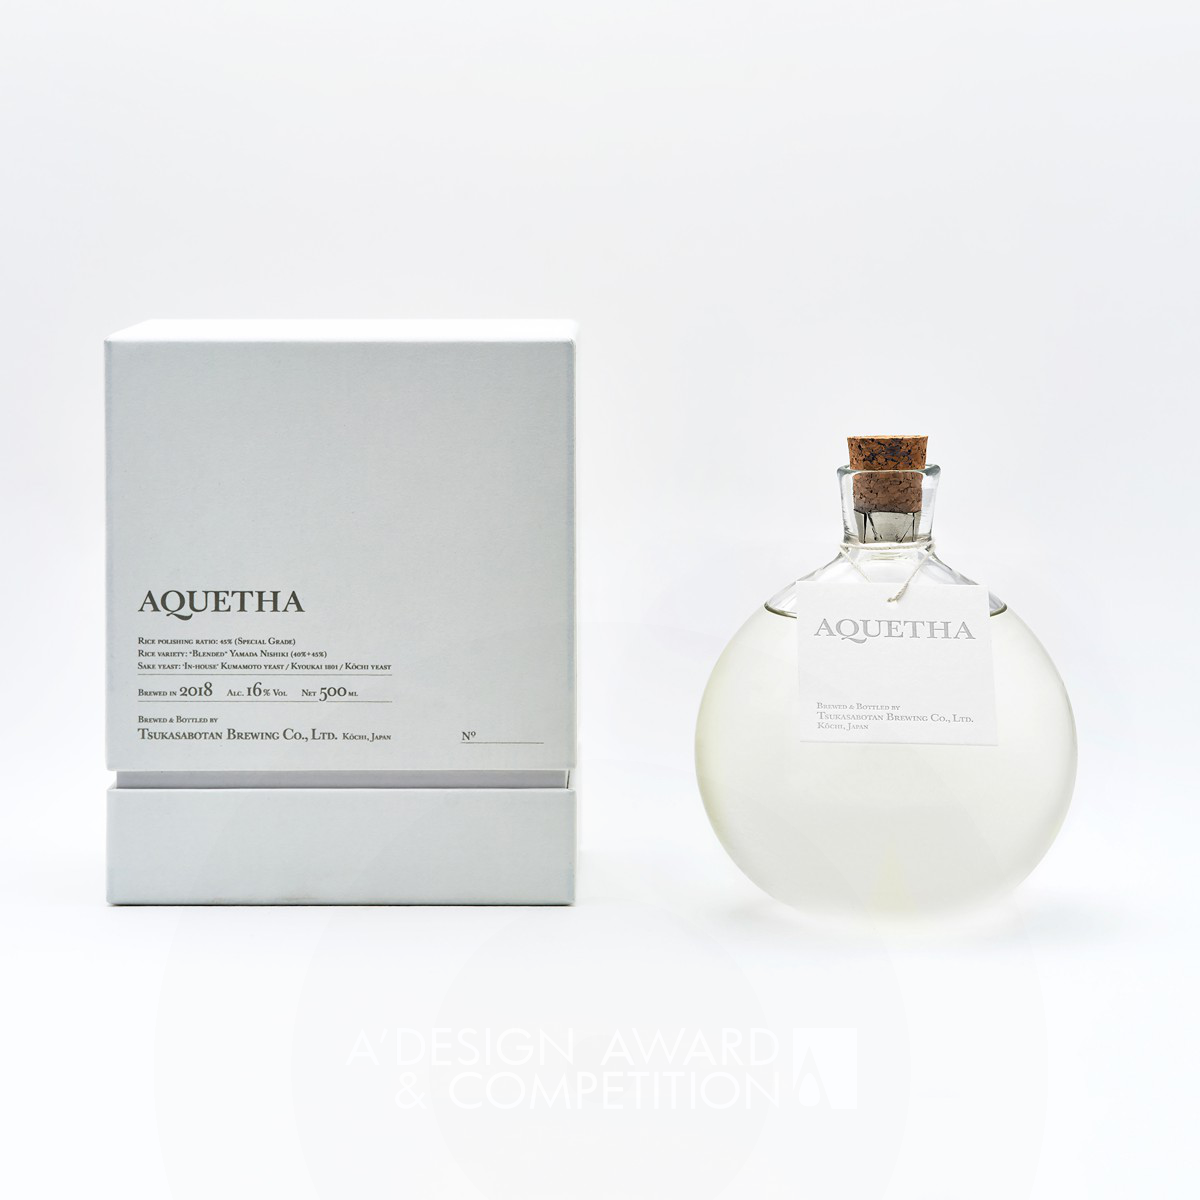 Aquetha Branding and Packaging